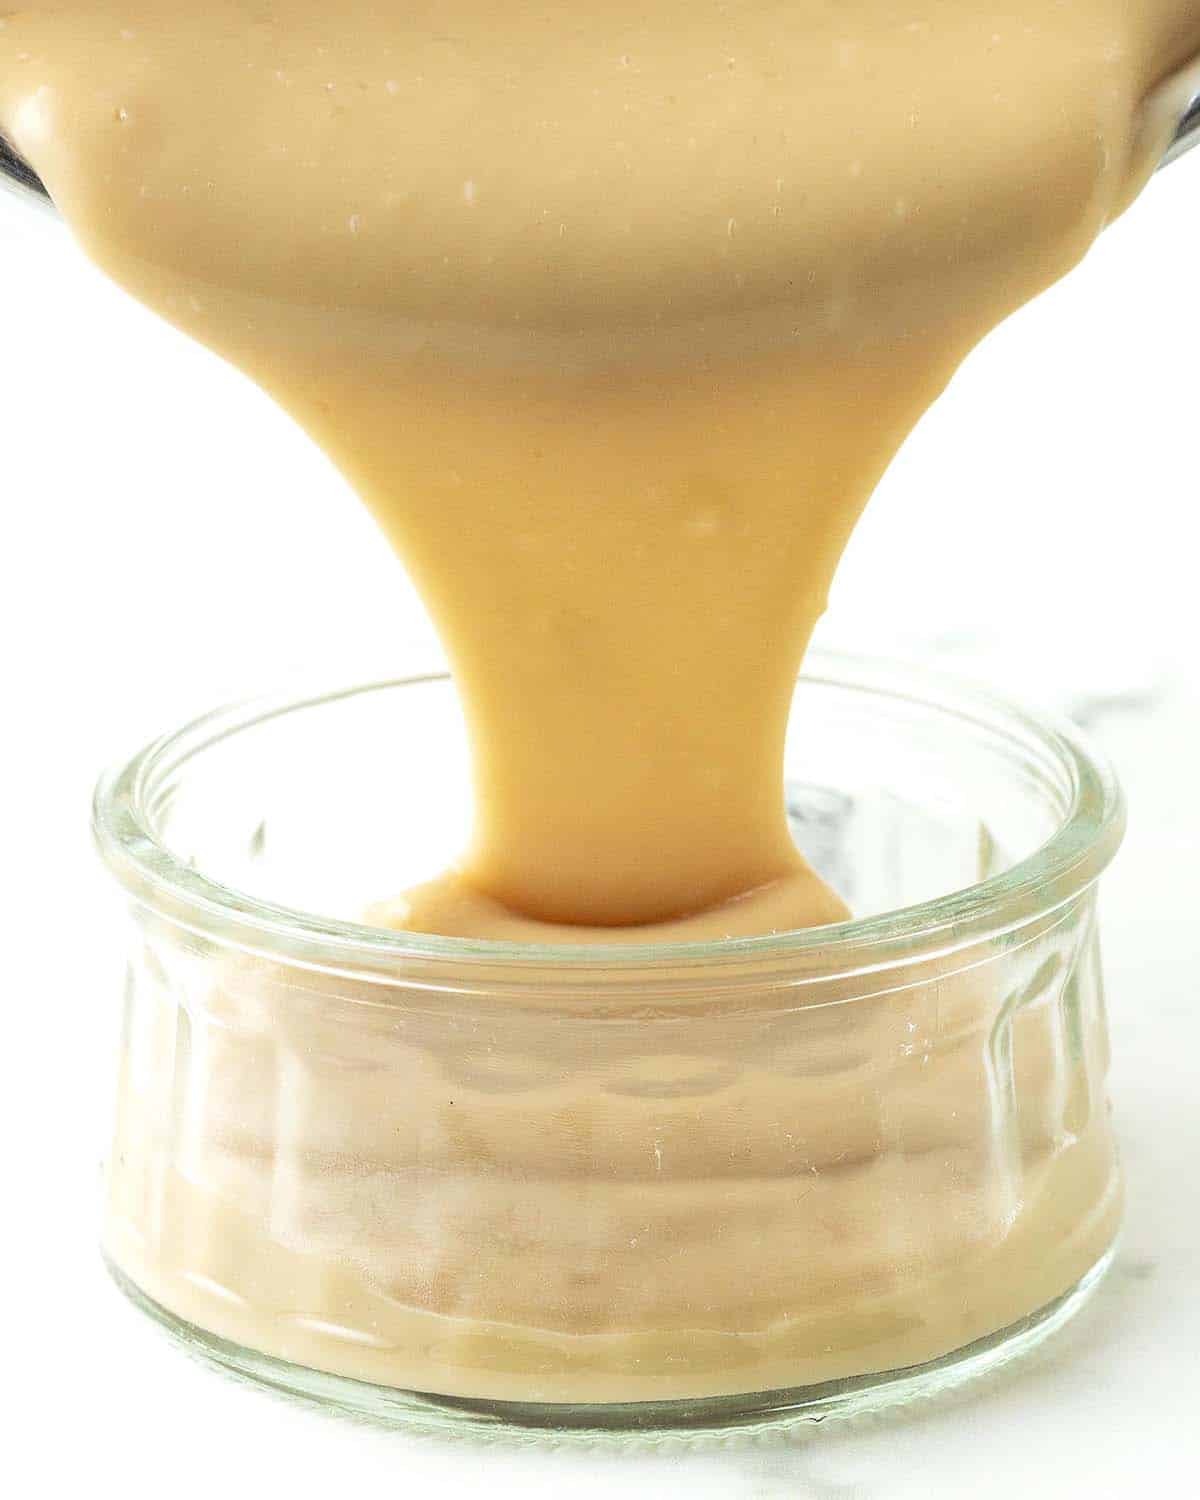 Homemade vegan butterscotch pudding being poured from a pot into a glass bowl.